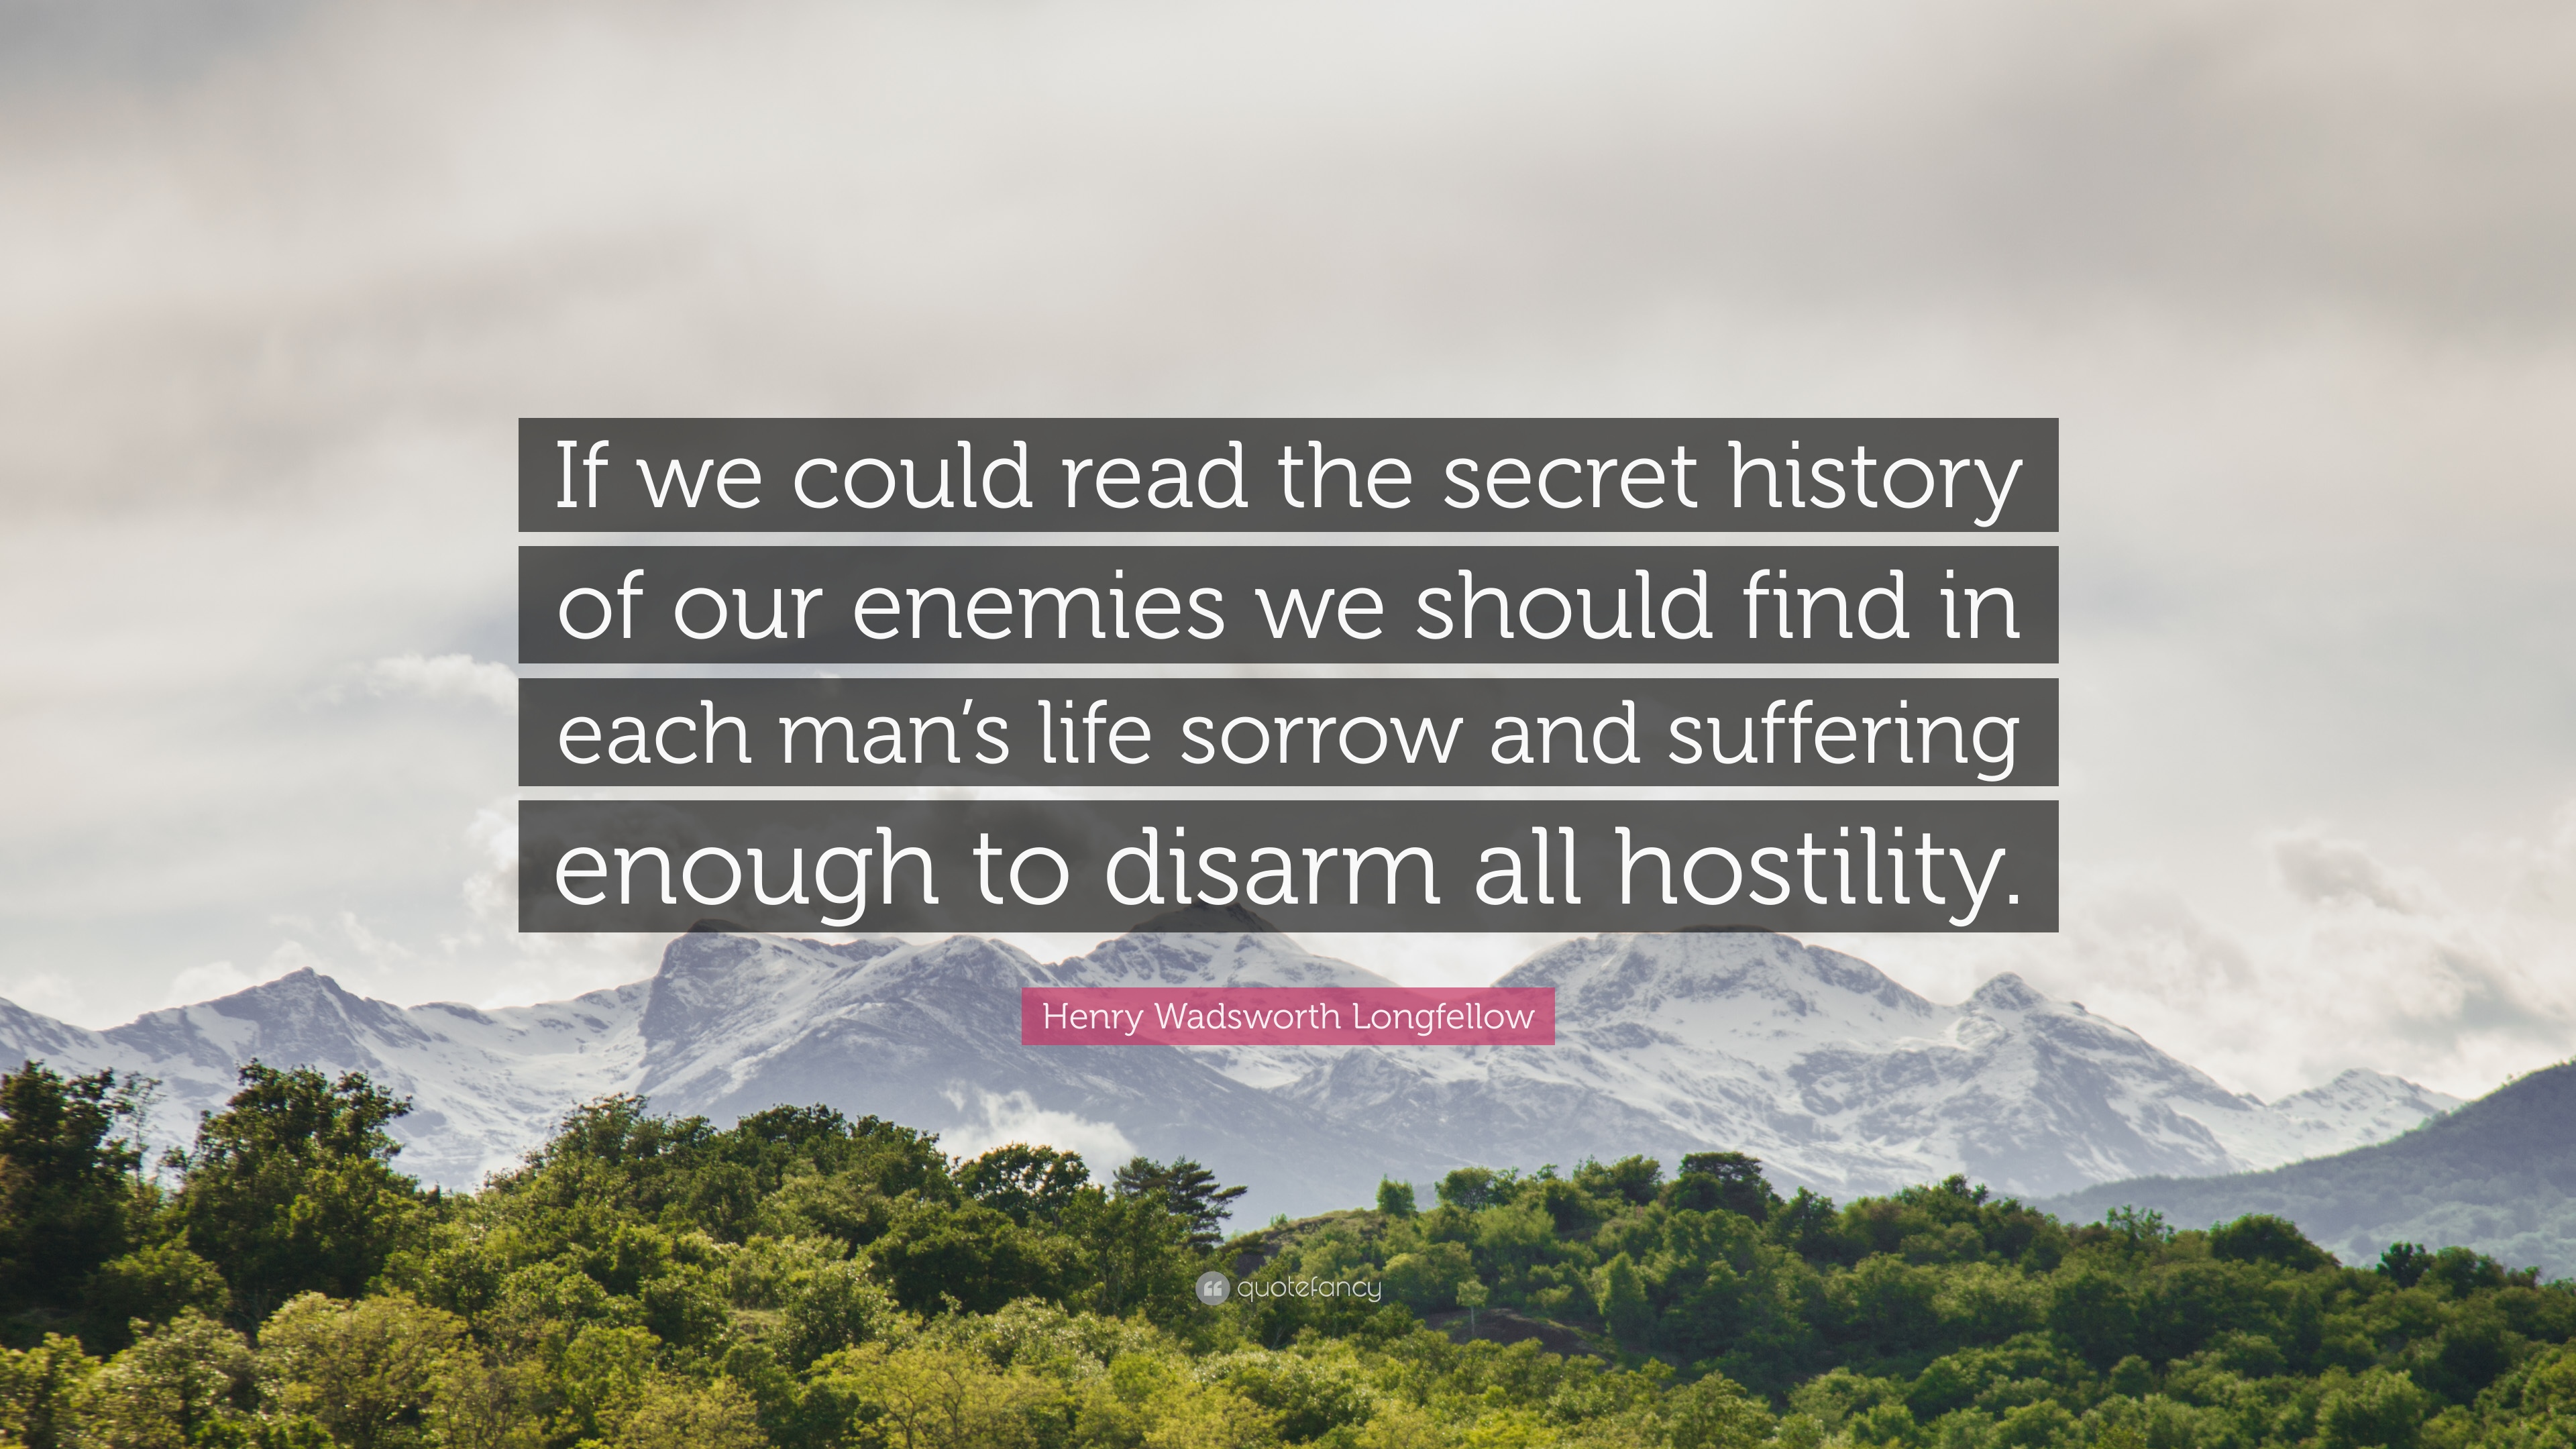 Henry Wadsworth Longfellow Quote: “If we could read the secret history of our enemies we should find in each man's life sorrow and suffering enough to disa.”